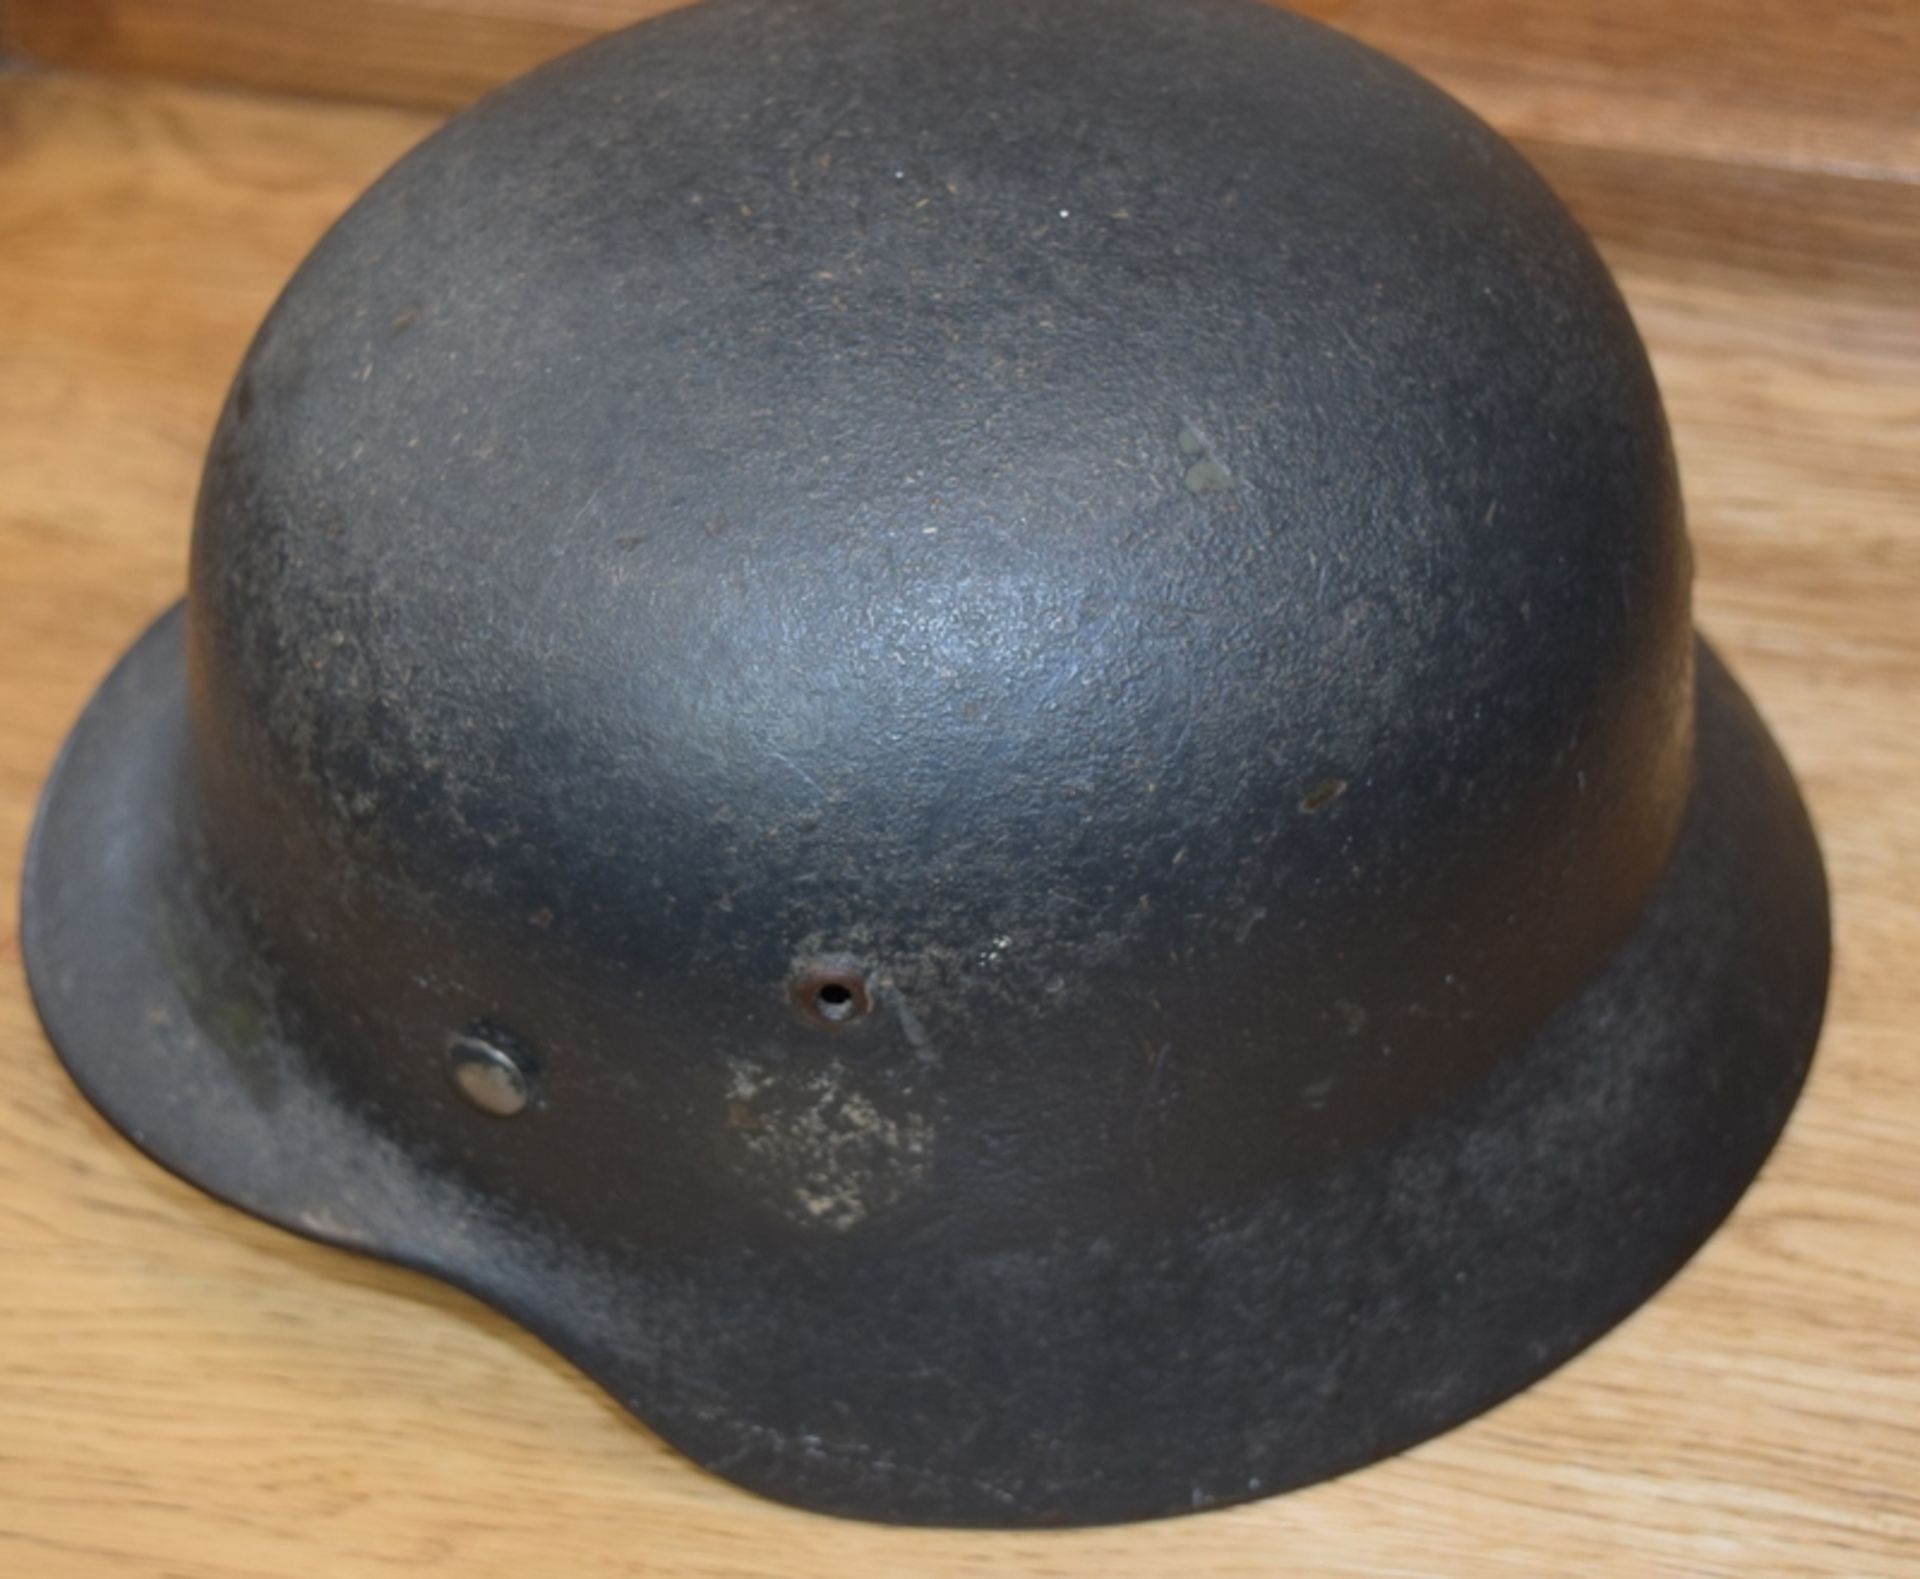 WW2 German M40 SE64 Helmet with double decals, Original leather liner and chin strap - Image 2 of 6